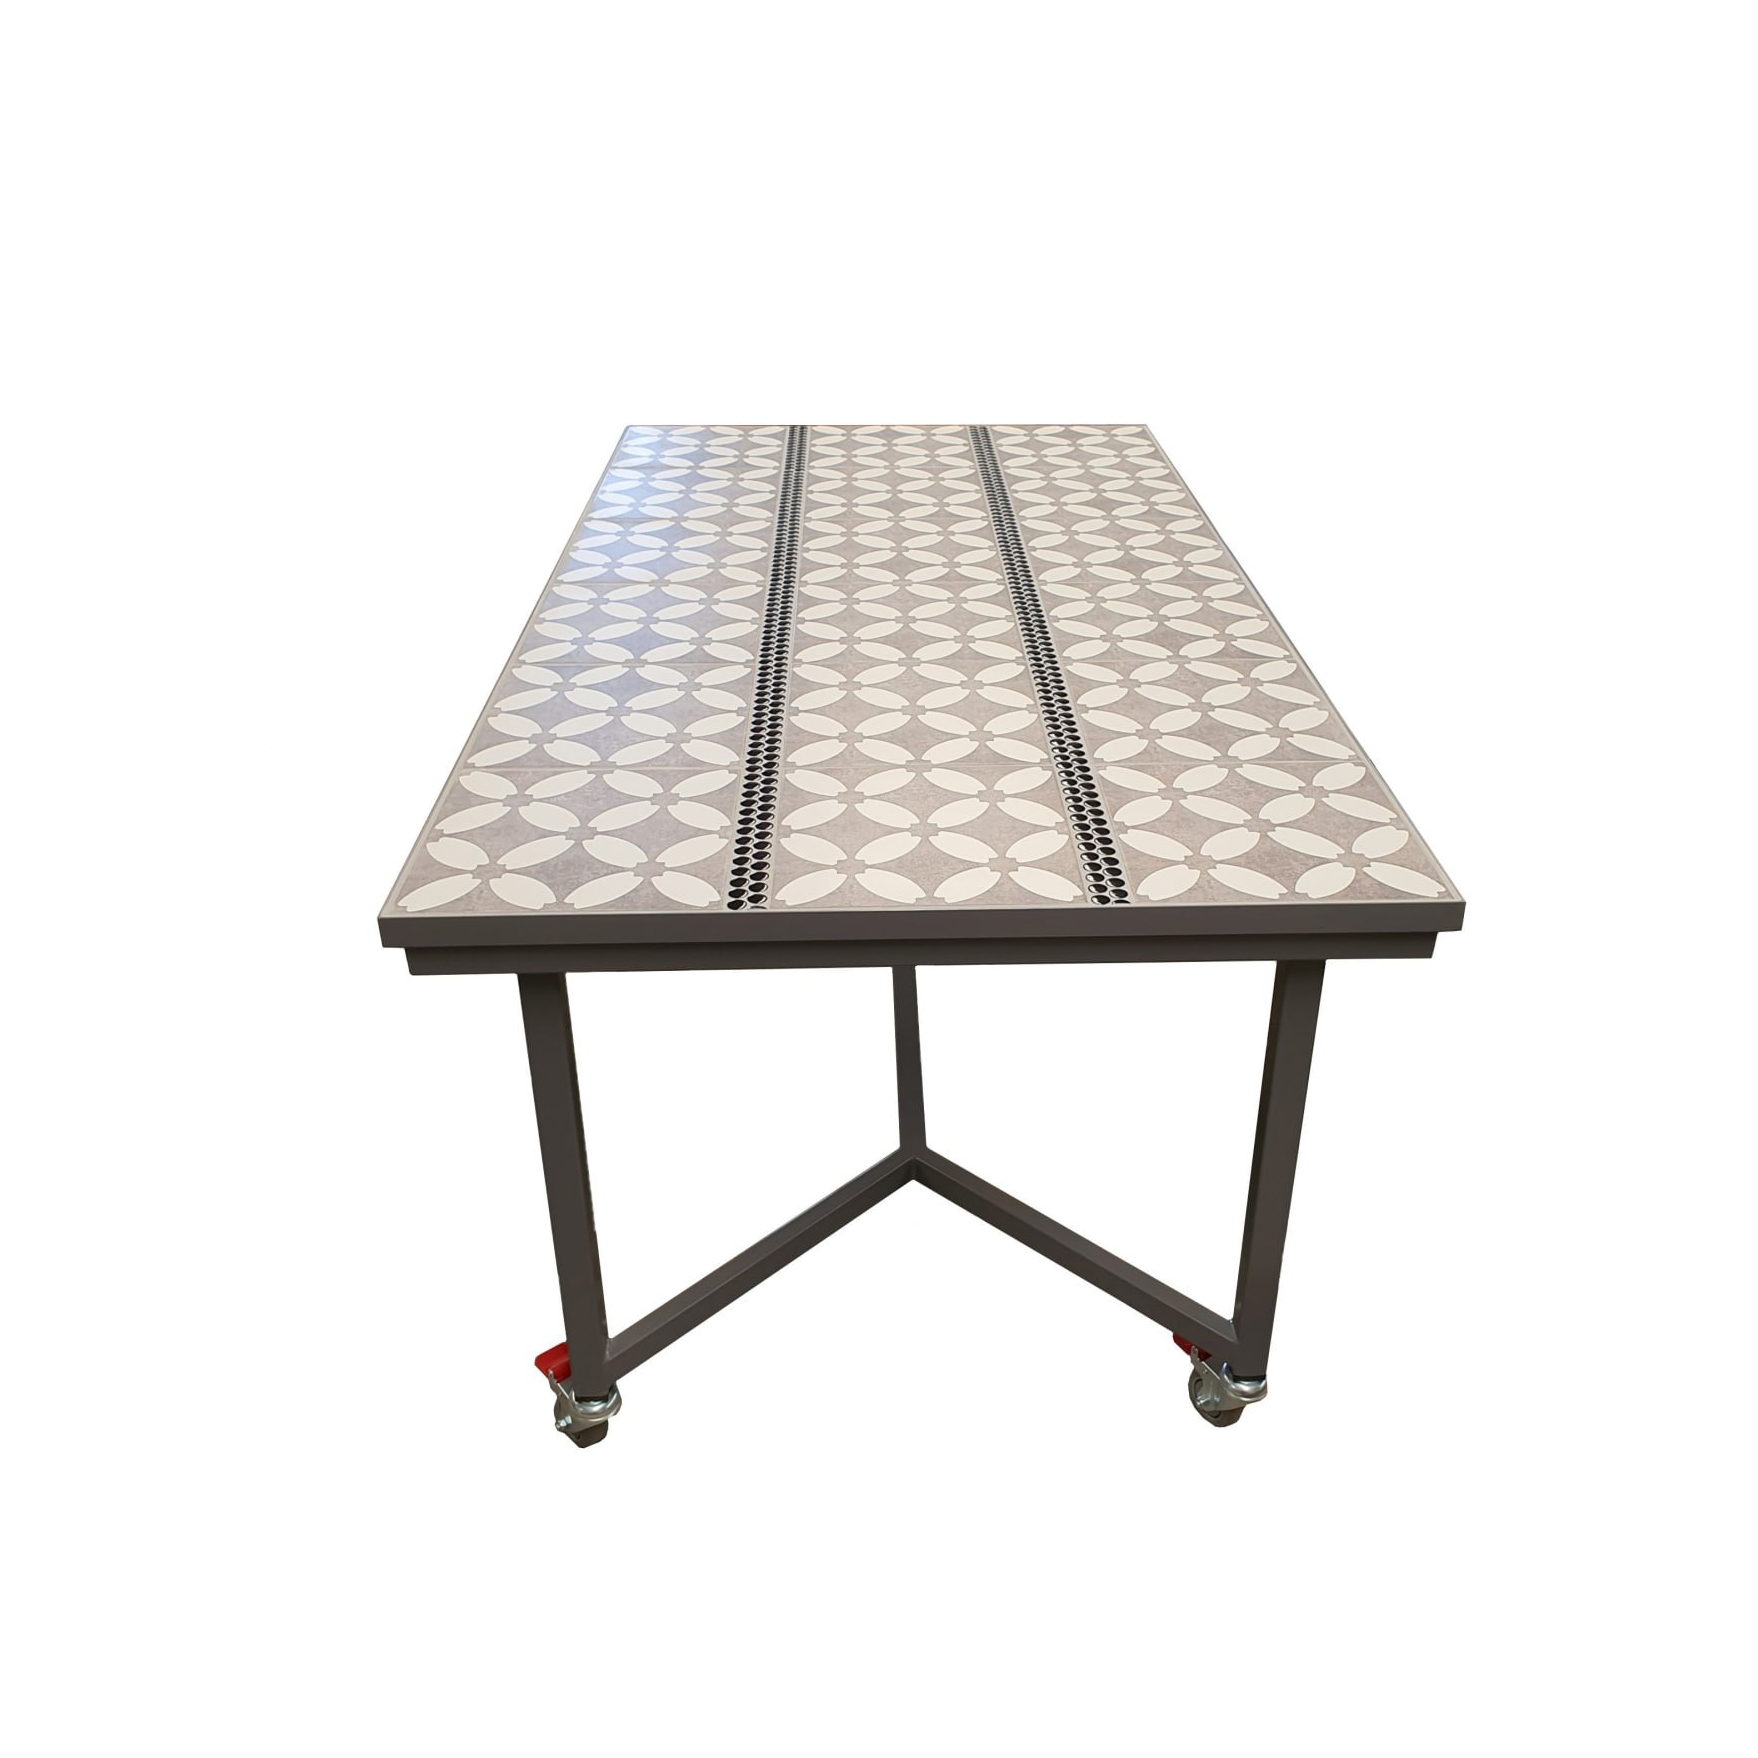 V Shape Table with Tiles & Pebbles